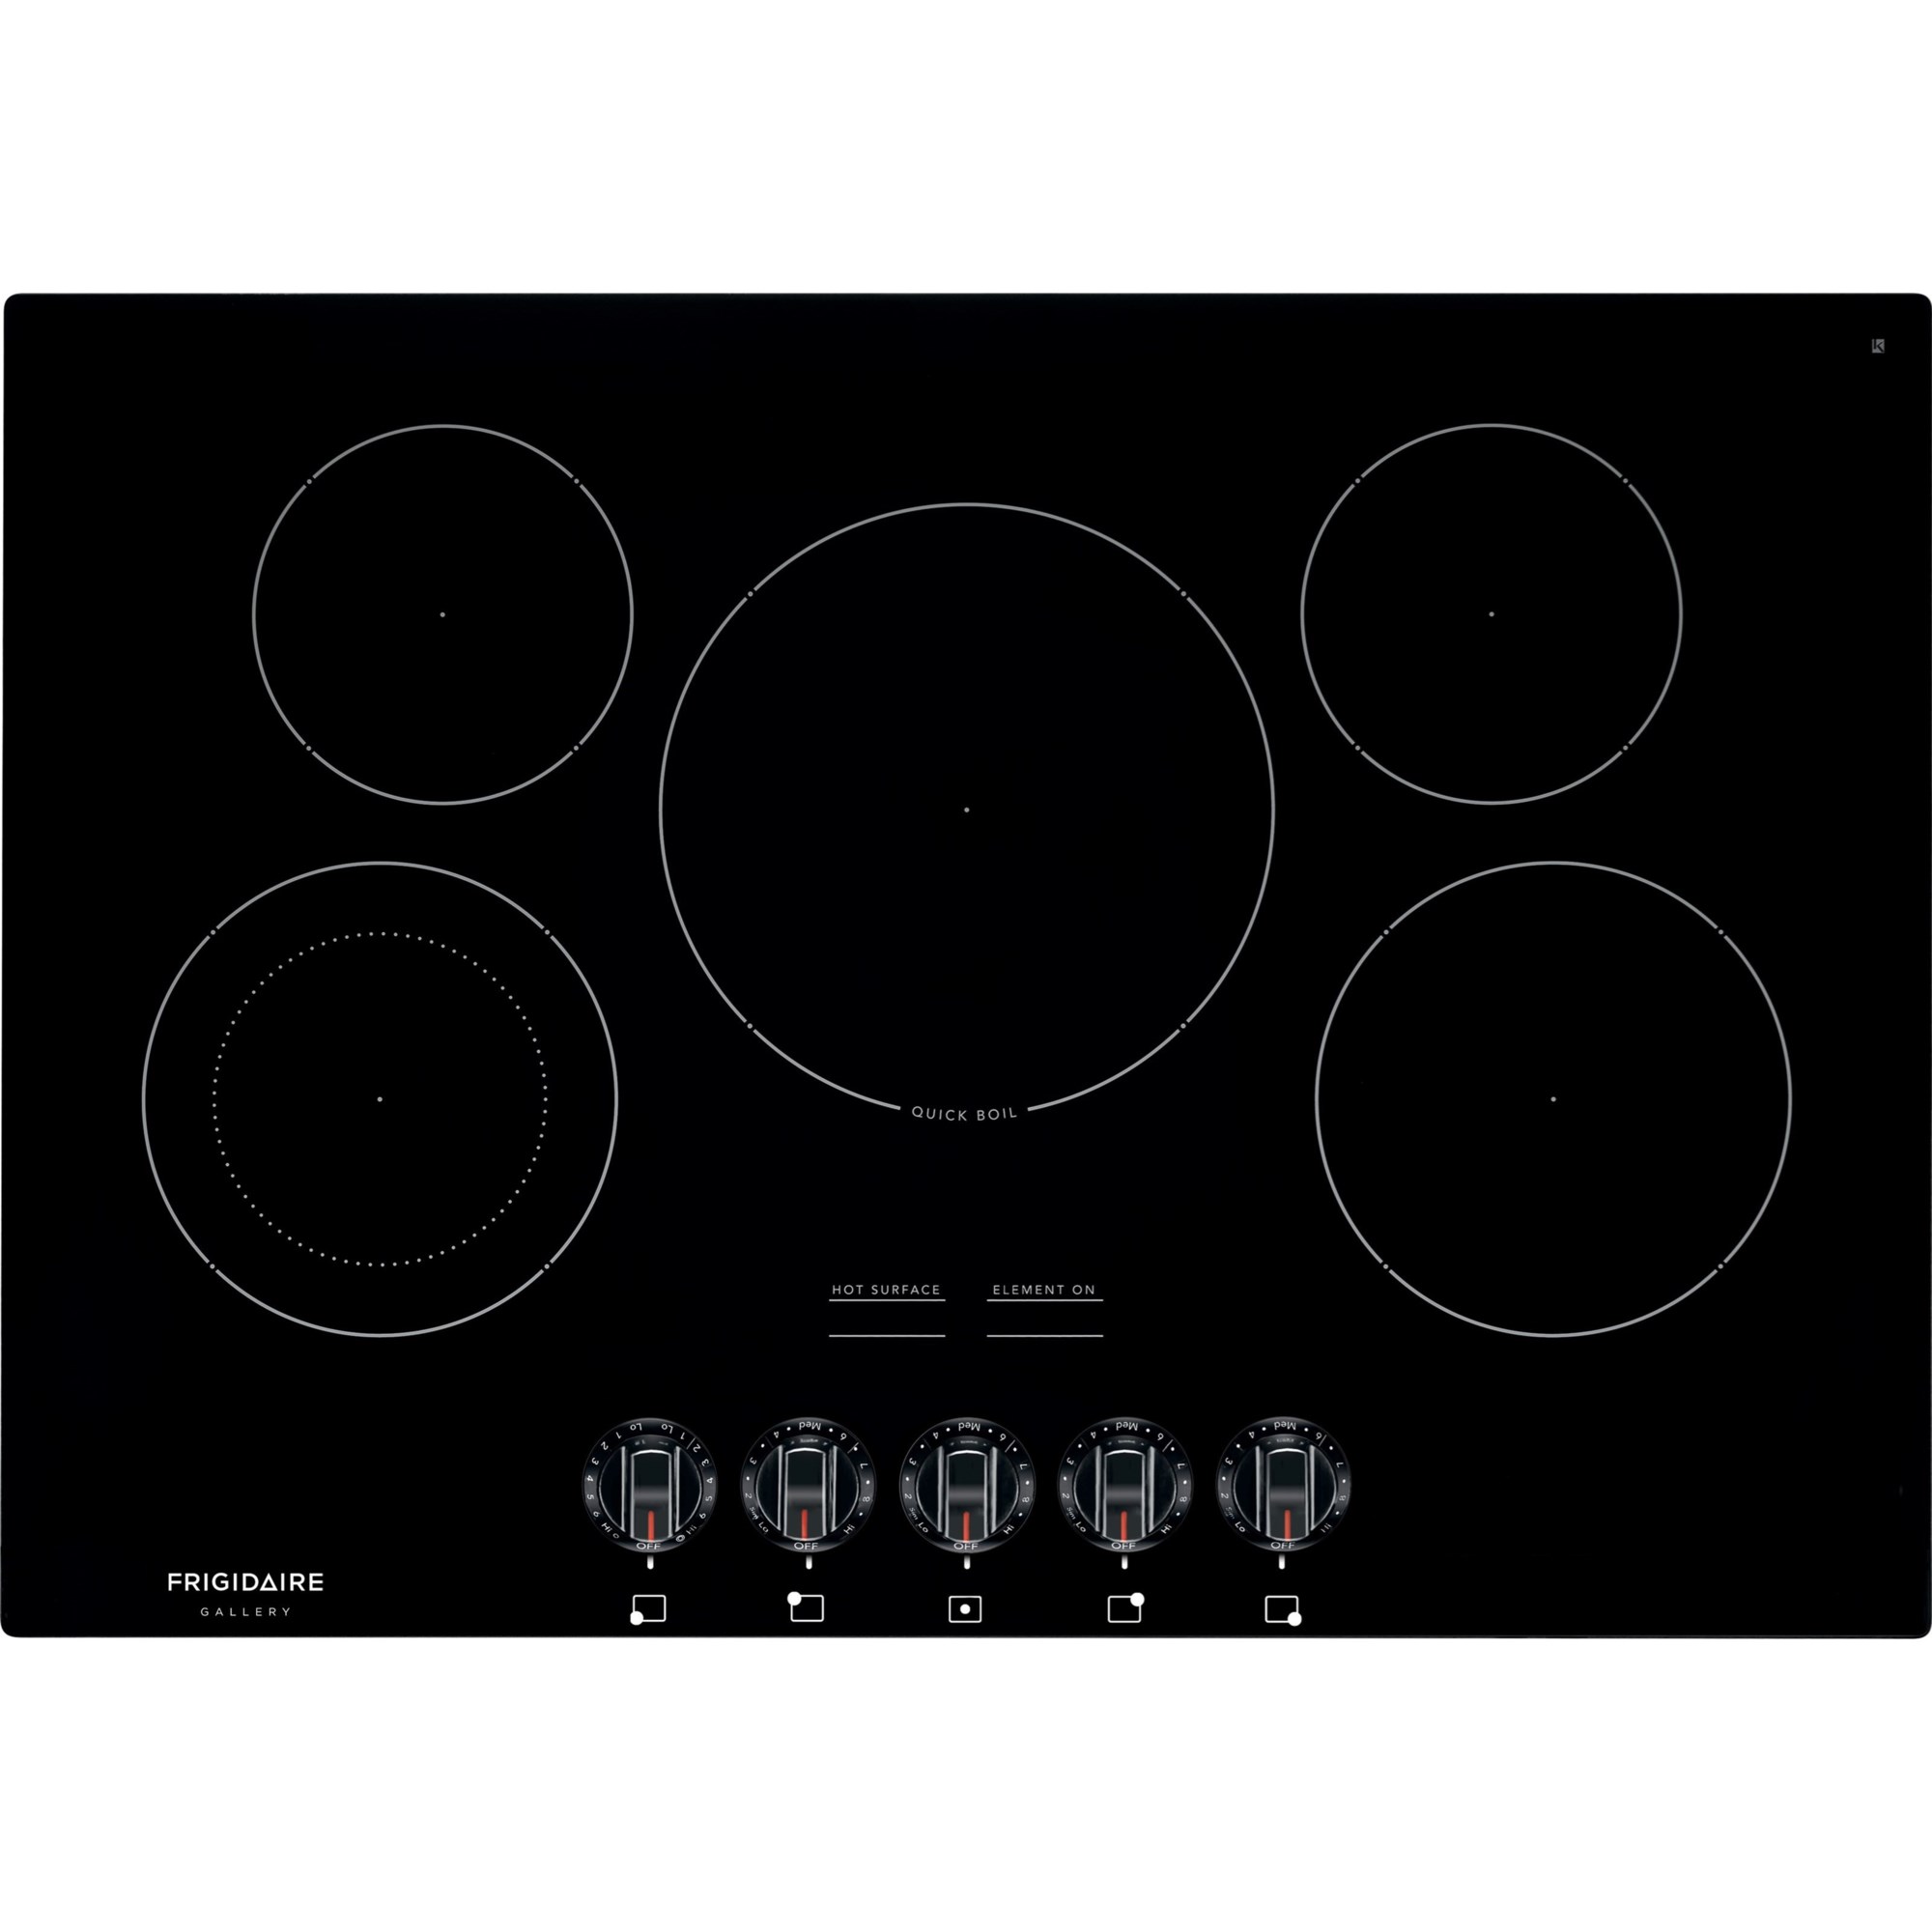 Frigidaire Gallery 30-Inch Electric Range review: Consistently